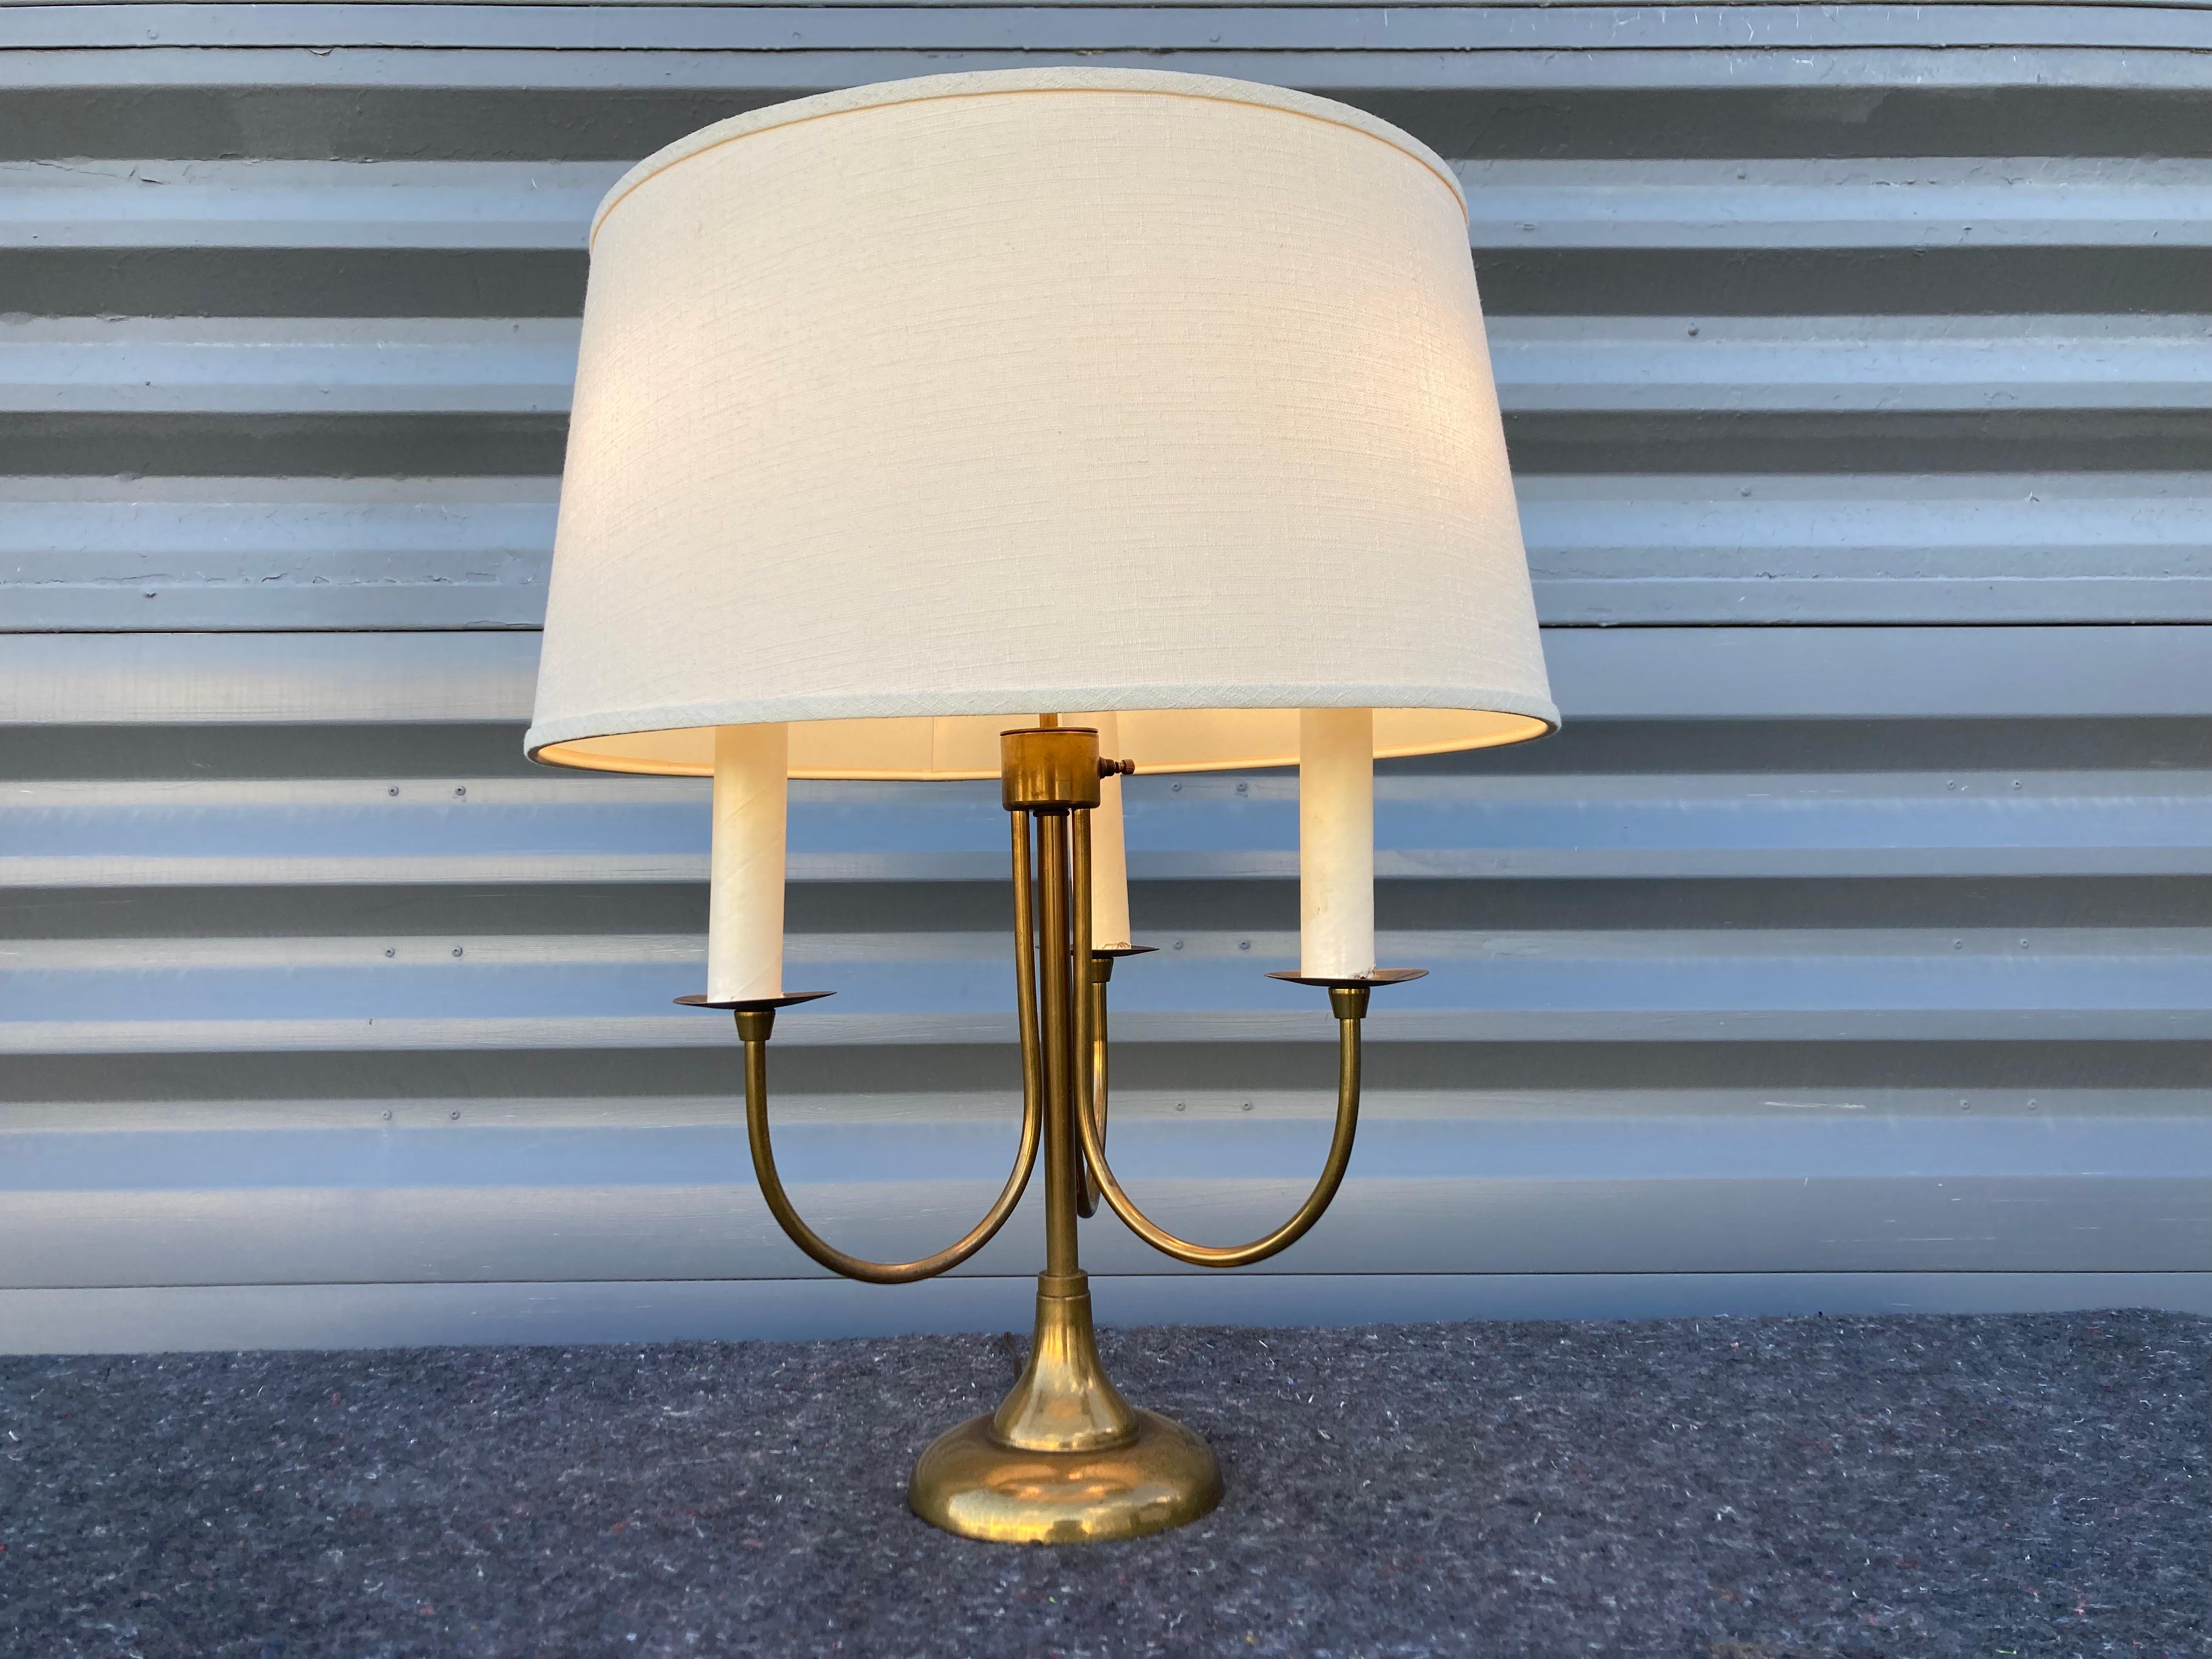 Pair of Mid-Century Modern Table Lamps, Brass, USA, 1950s For Sale 5